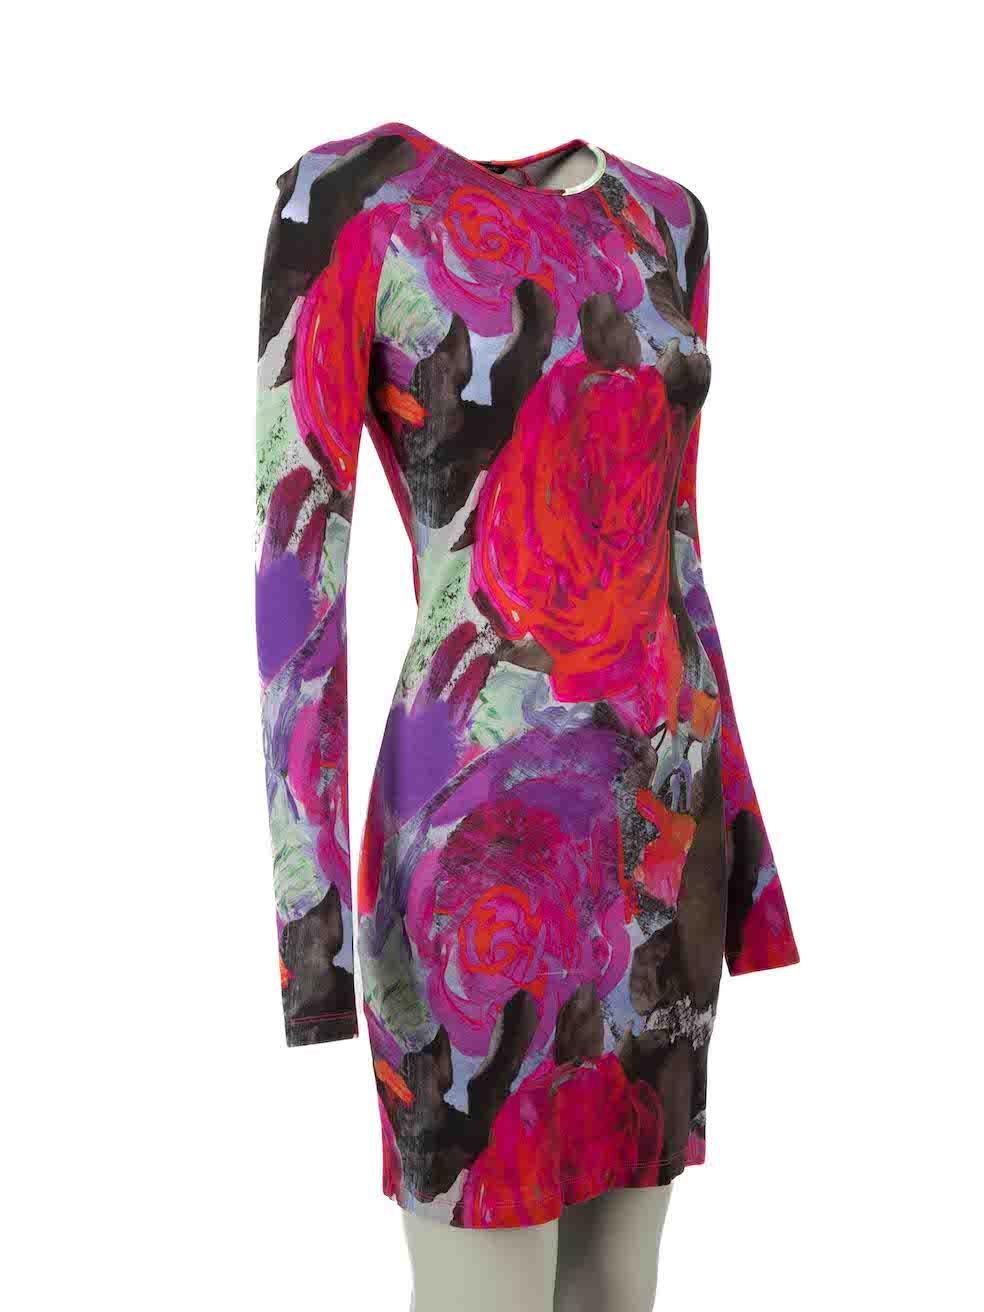 CONDITION is Very good. Hardly any visible wear to dress is evident on this used Christopher Kane designer resale item.
 
 Details
 Pink tone
 Viscose
 Mini dress
 Bodycon and stretchy
 Abstract print
 Round neckline
 Puff sleeves
 
 Made in Italy
